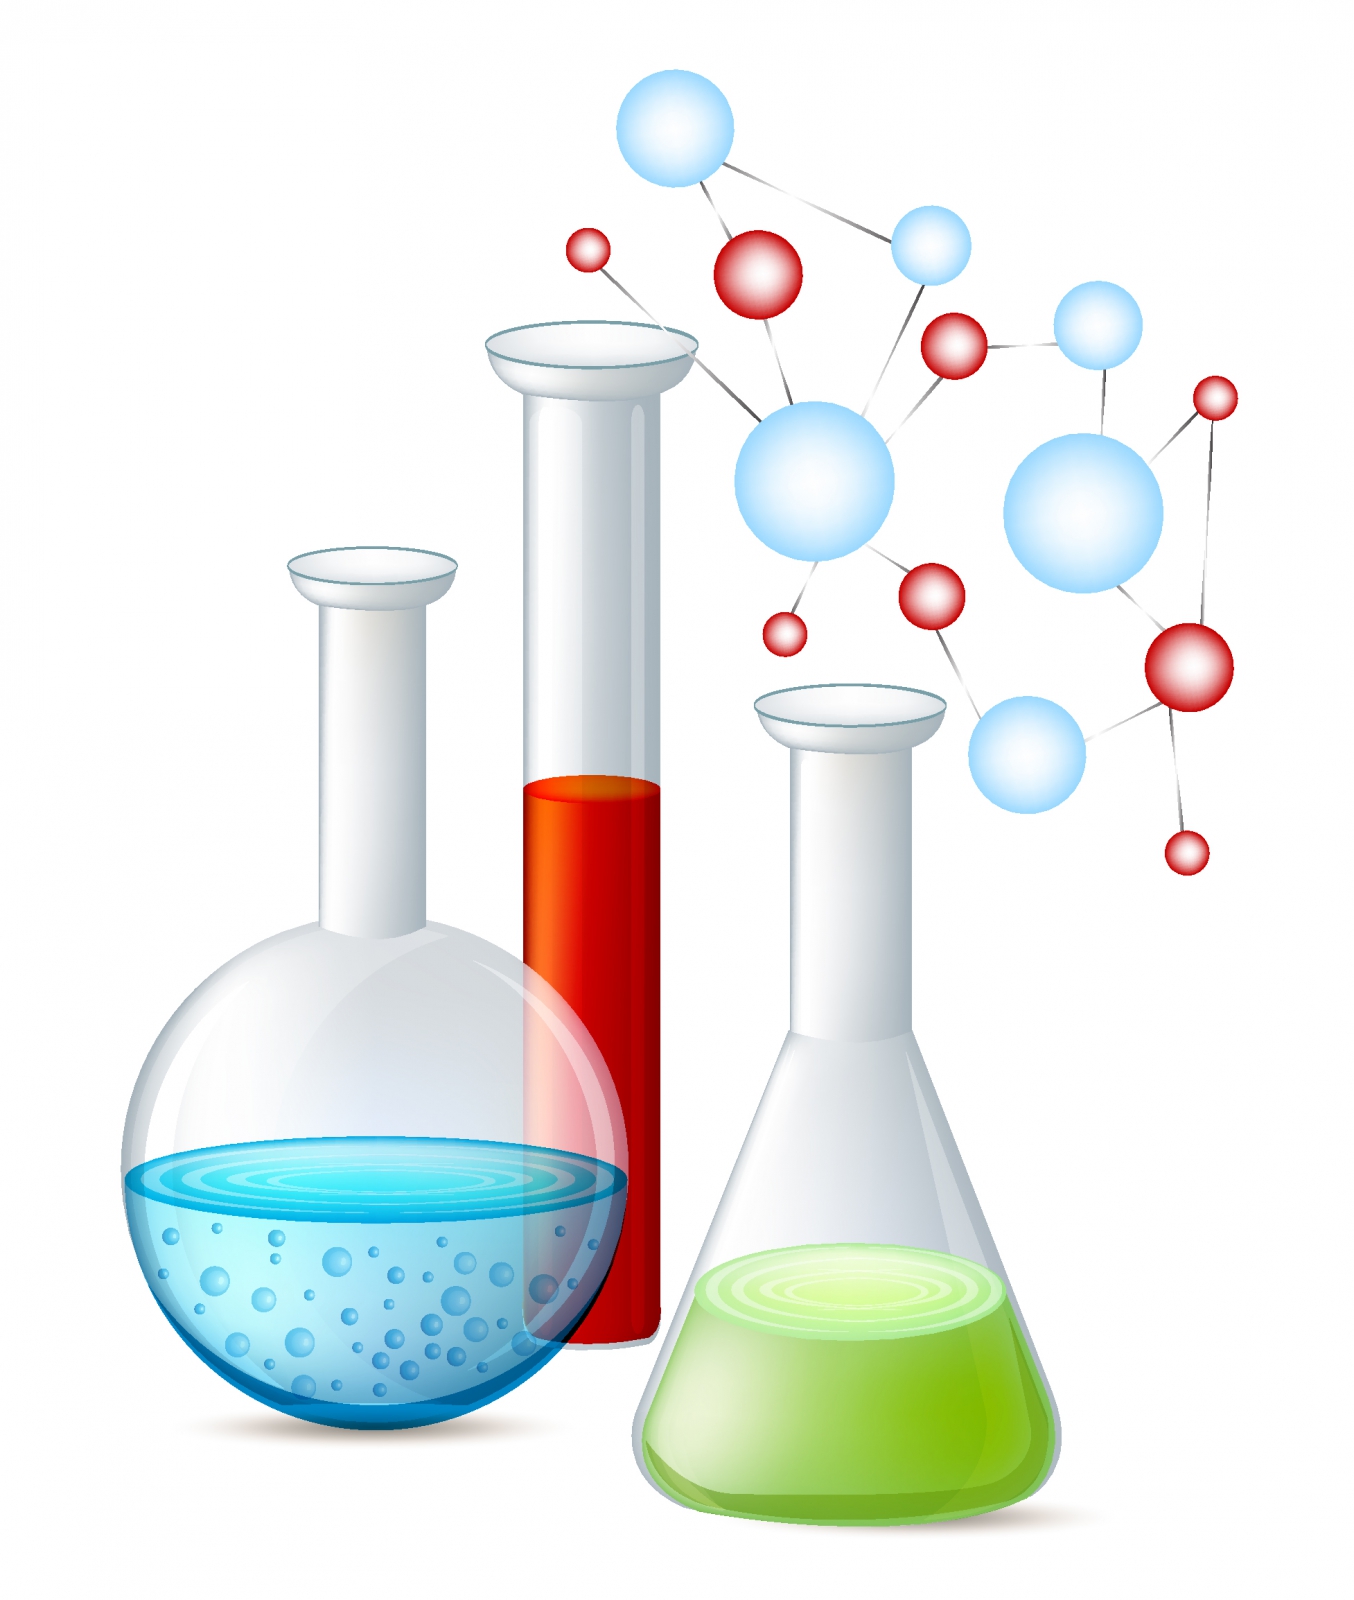 Chemistry science Free Vector / 4Vector